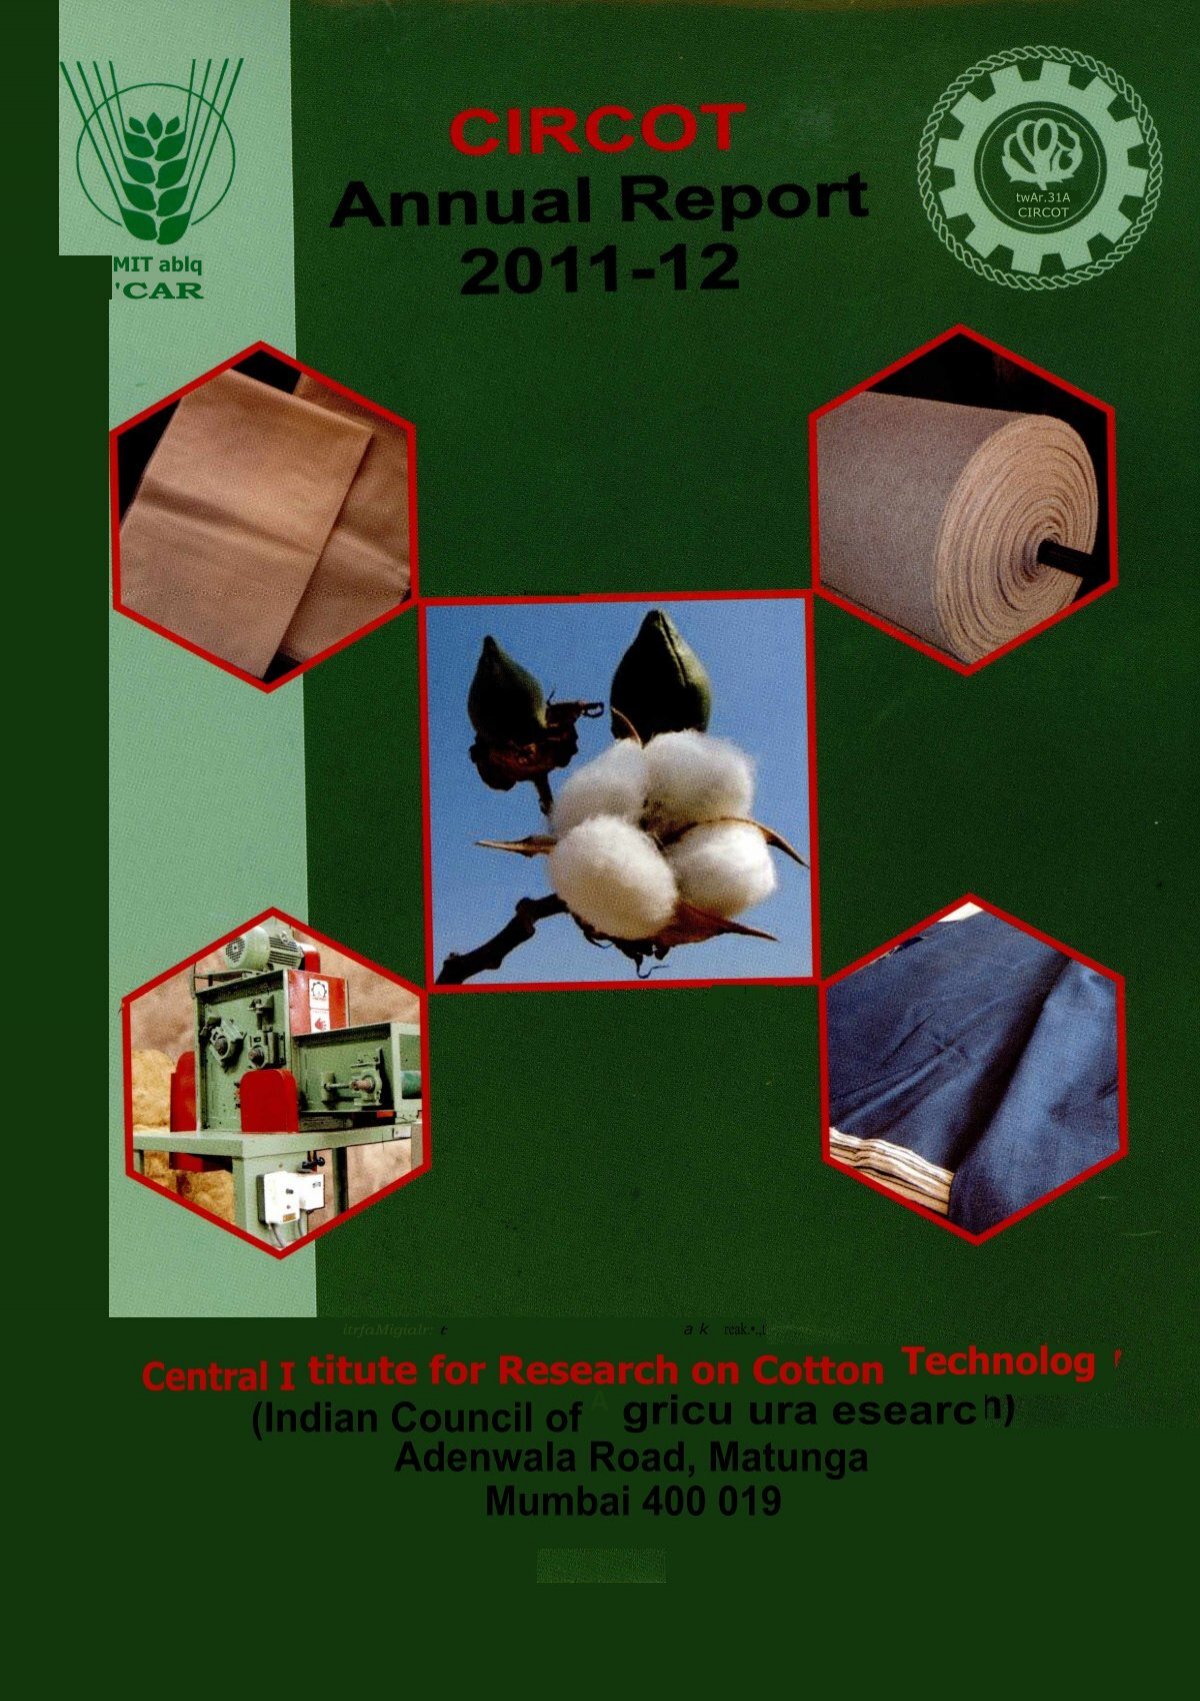 Annual Report 2011-12 - Central Institute for Research on Cotton